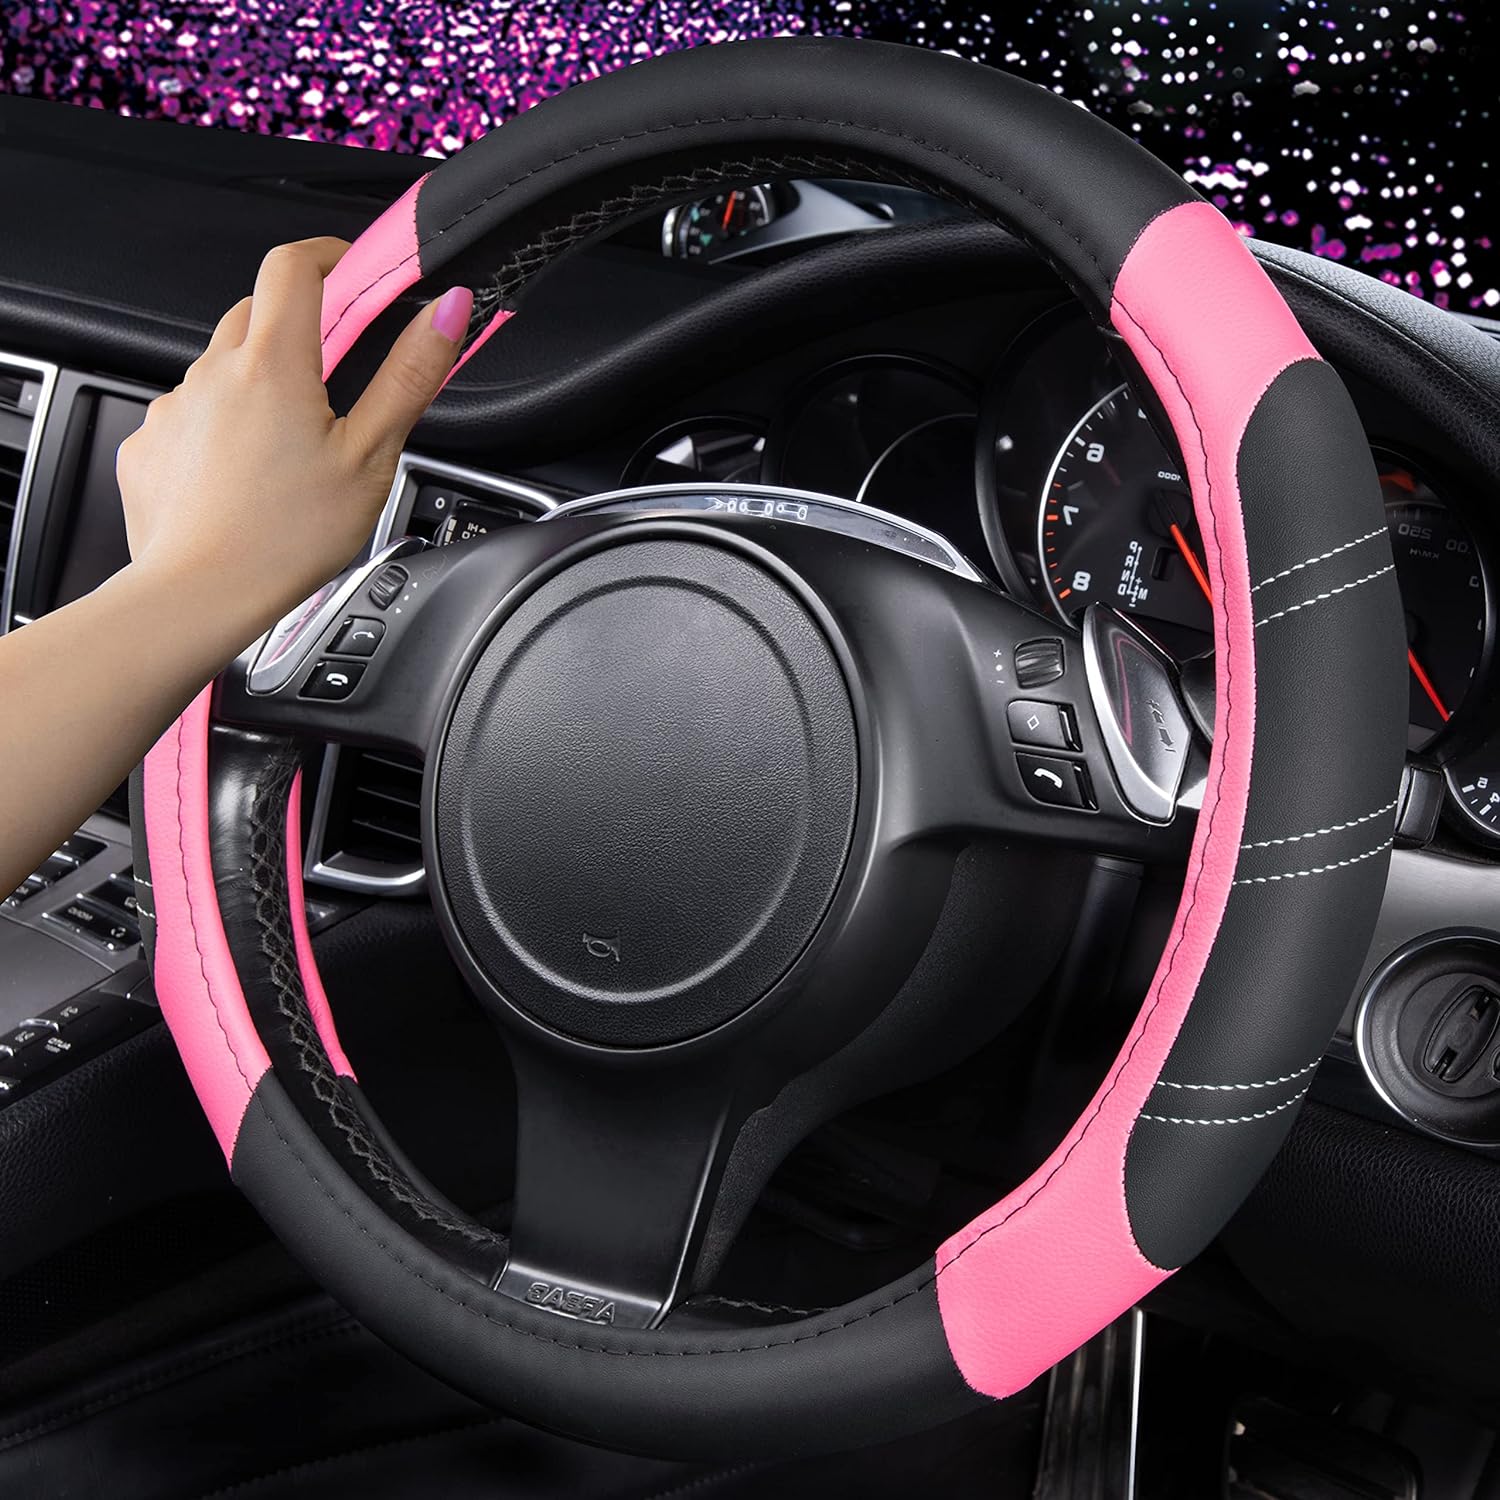 CAR PASS Line Rider Sporty Steering Wheel Cover and Car Seat Cover Sets. 11PCS Universal Fit Car Seat Cover with 14.5-15 Inch Steering Wheel Cover.(Black and Pink)